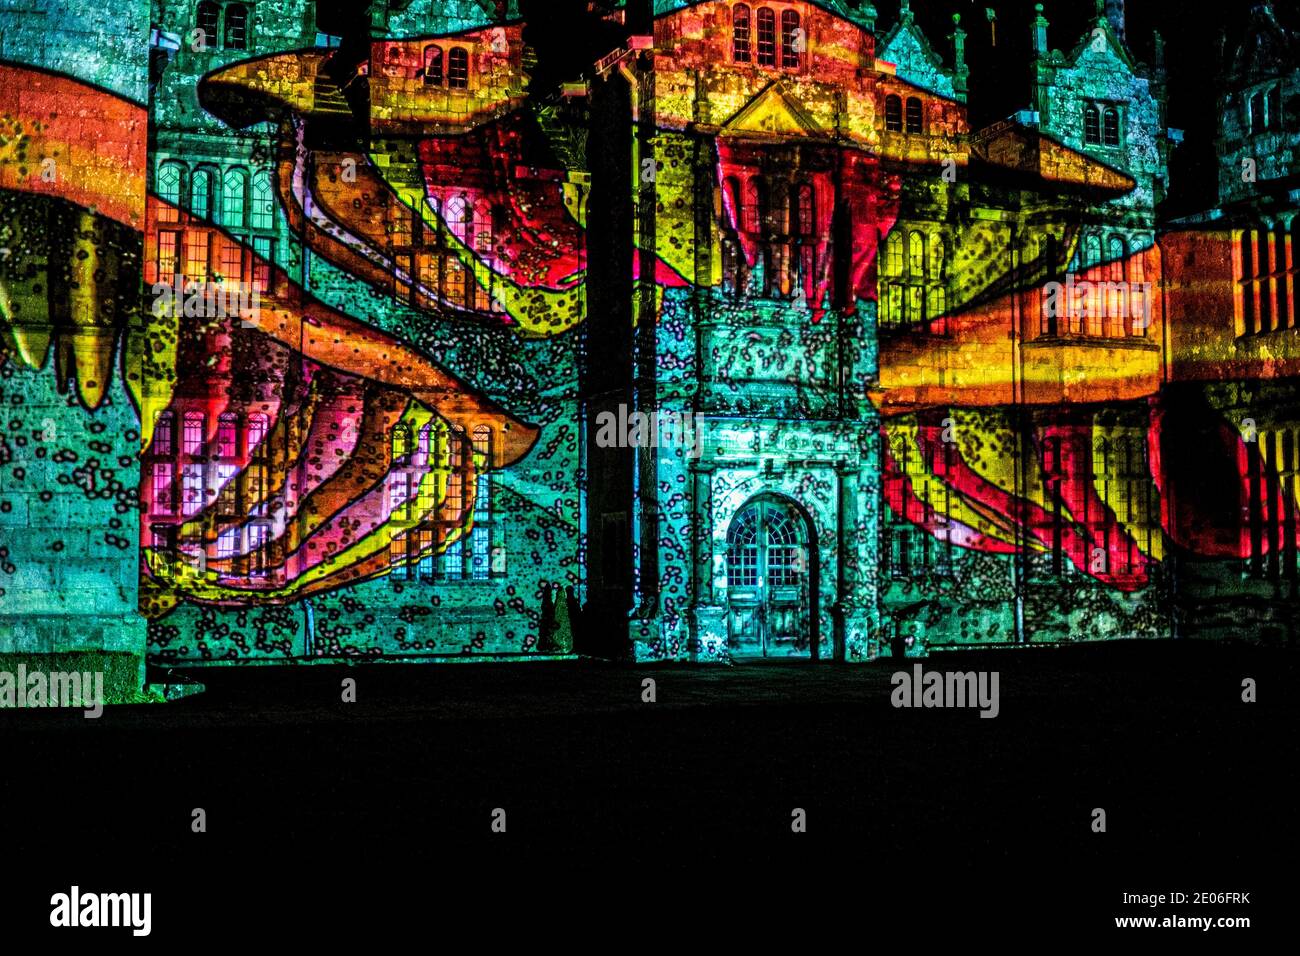 December 29, 2020: Haywards Heath, UK. 29 December 2020. Christmas light trail 'Glow Wild 2020'' livens up this year's festivities at Wakehurst Place Botanic Gardens, in West Sussex. In the evening the trail lights up and brings to life Wakehurst botanic gardens and its 16th century mansion with its enchanting atmosphere created by glowing lanterns, torches of fire, and enthralling projections. Now in its seventh year, 'Glow Wild'' has gone ahead this year despite the pandemic, by maintaining rigorous safety protocols in line with the latest government guidance on illuminated trails. A n Stock Photo